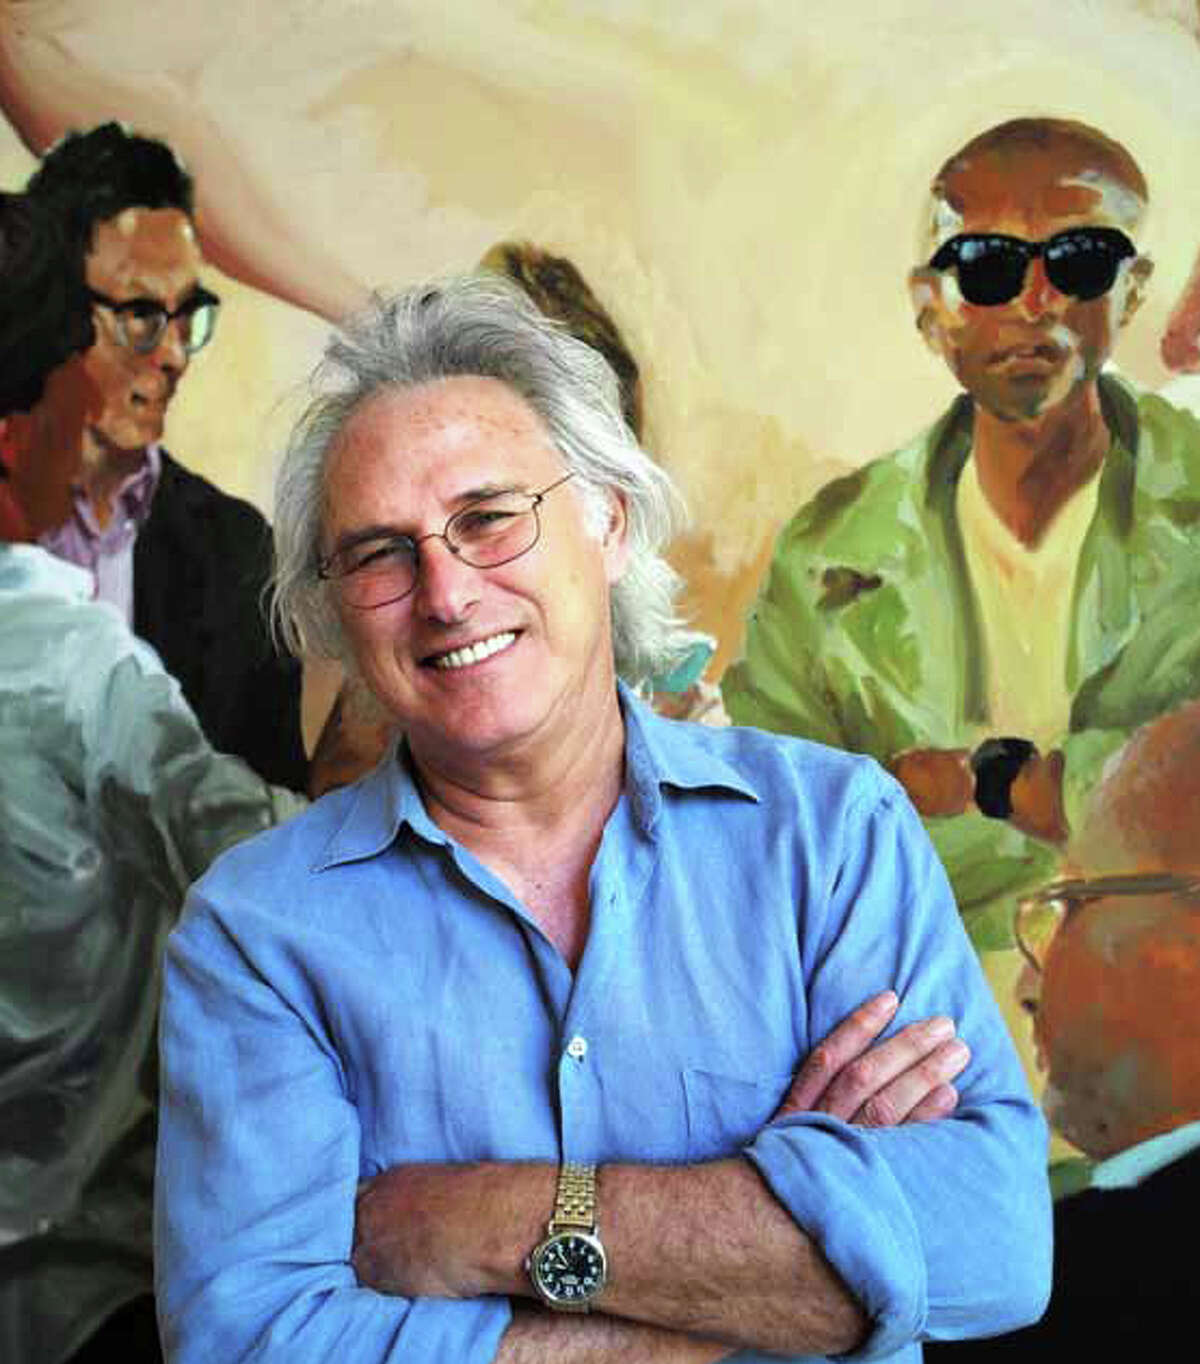 Paintings and photographs by Eric Fischl will be featured in an exhibit at the Westport Arts Center.